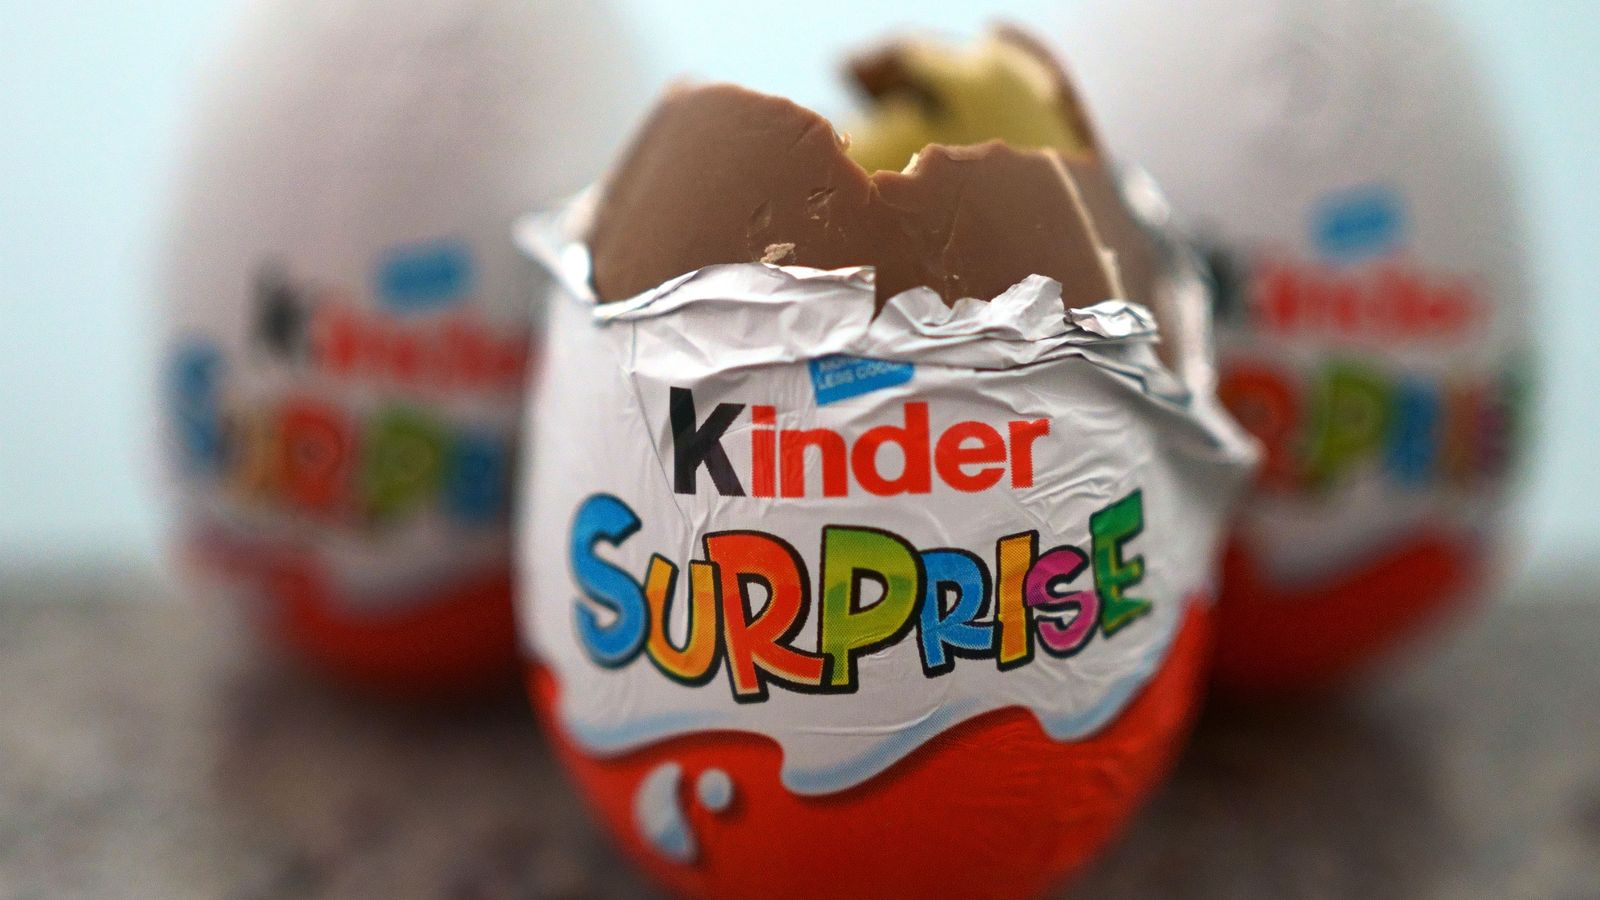  Kinder salmonella link: Outbreak suspected to be related to buttermilk used in Belgian factory 